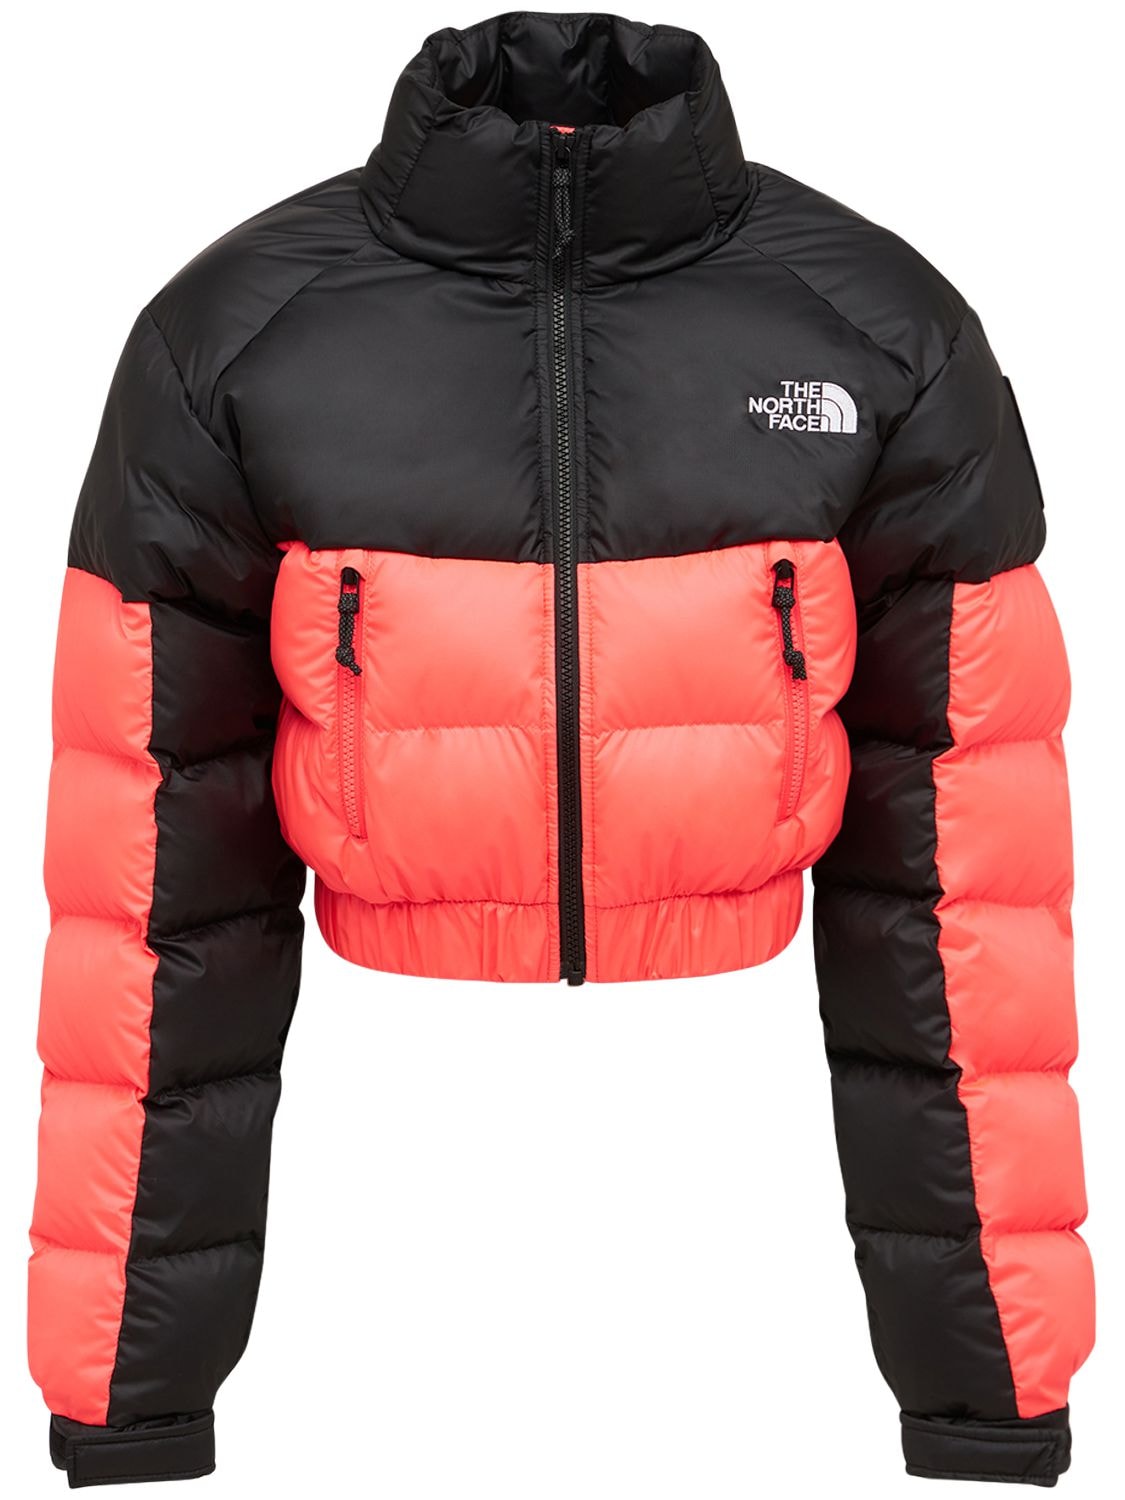 THE NORTH FACE BLACK BOX PHLEGO PUFFER JACKET